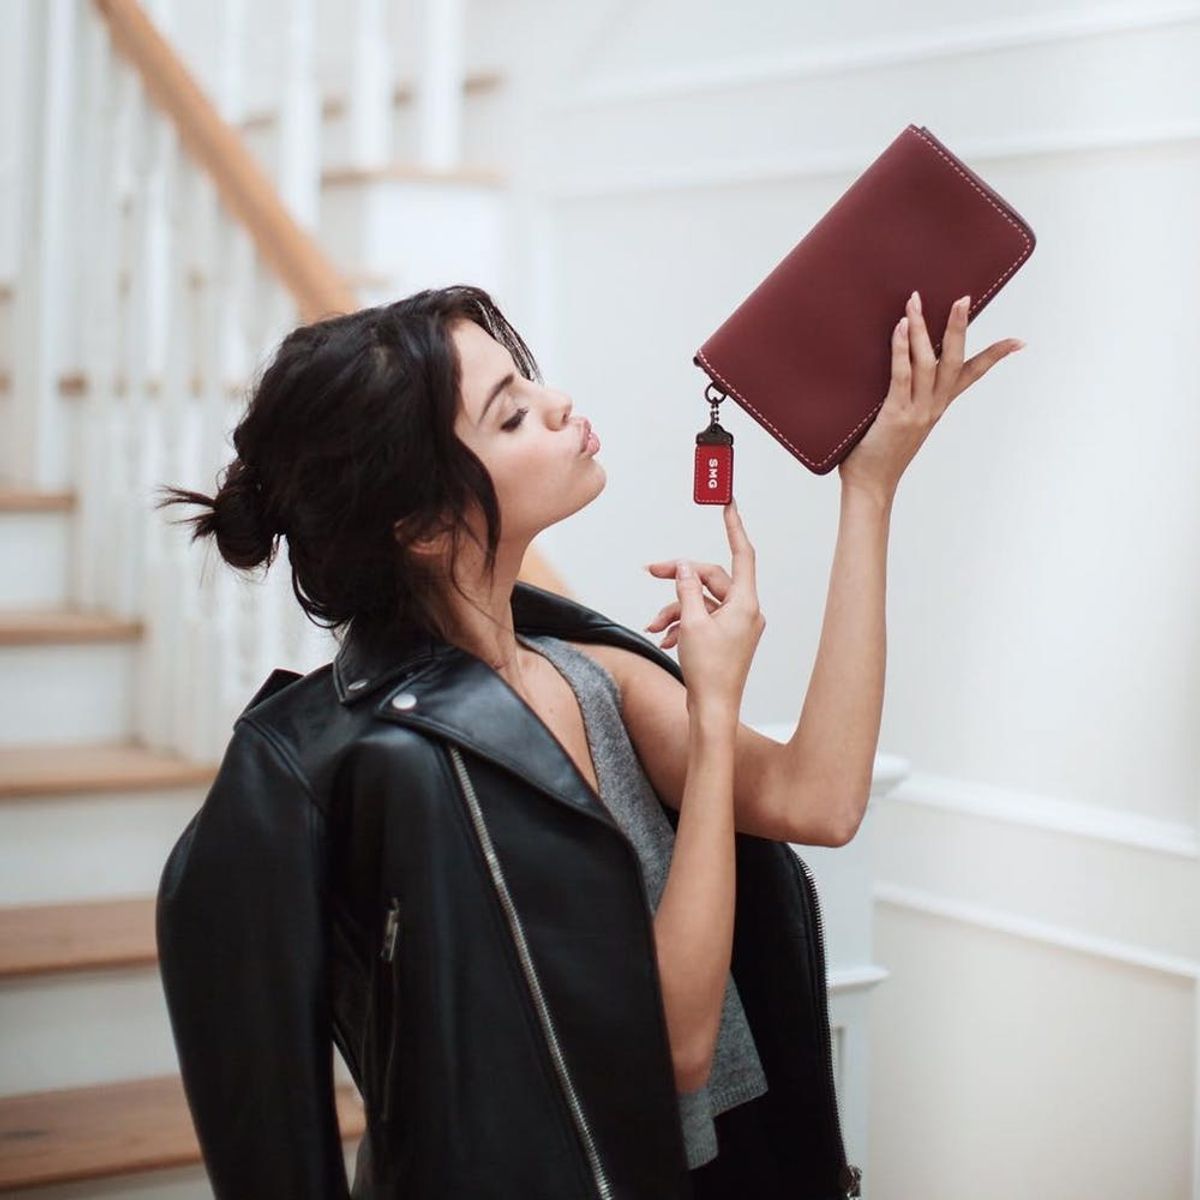 OMG Selena Gomez Is the New Face of Coach and We’re Flipping Out